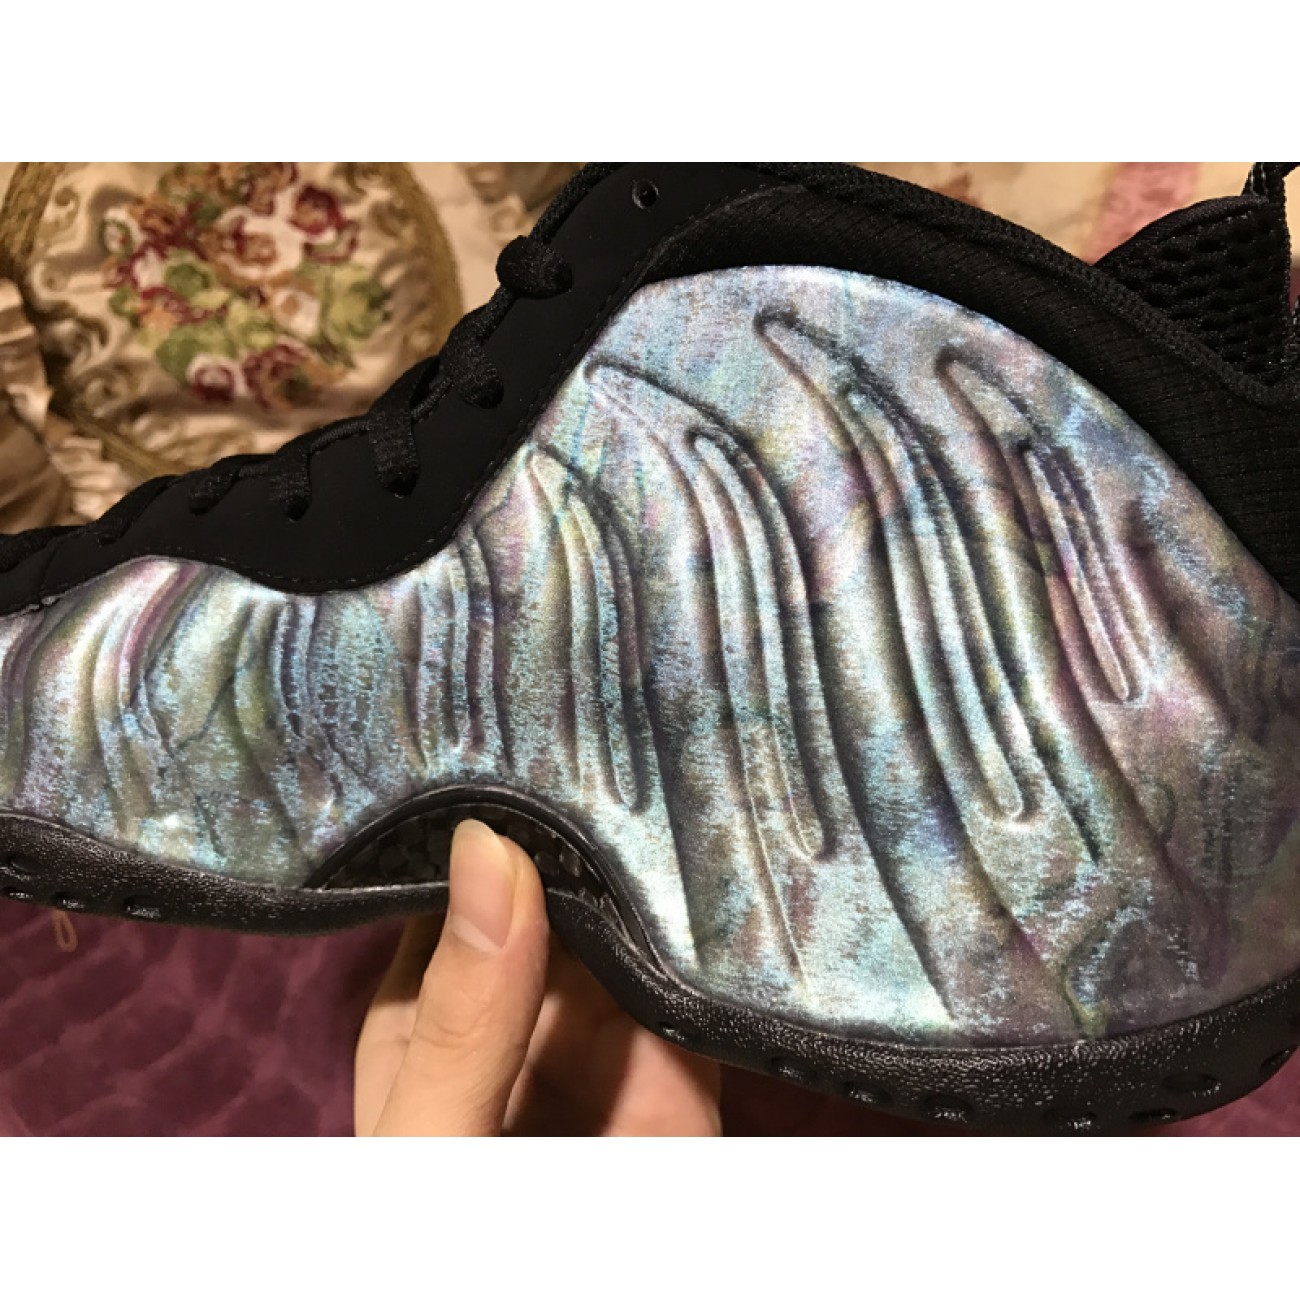 Nike Air Foamposite One PRM "Abalone" 575420-009